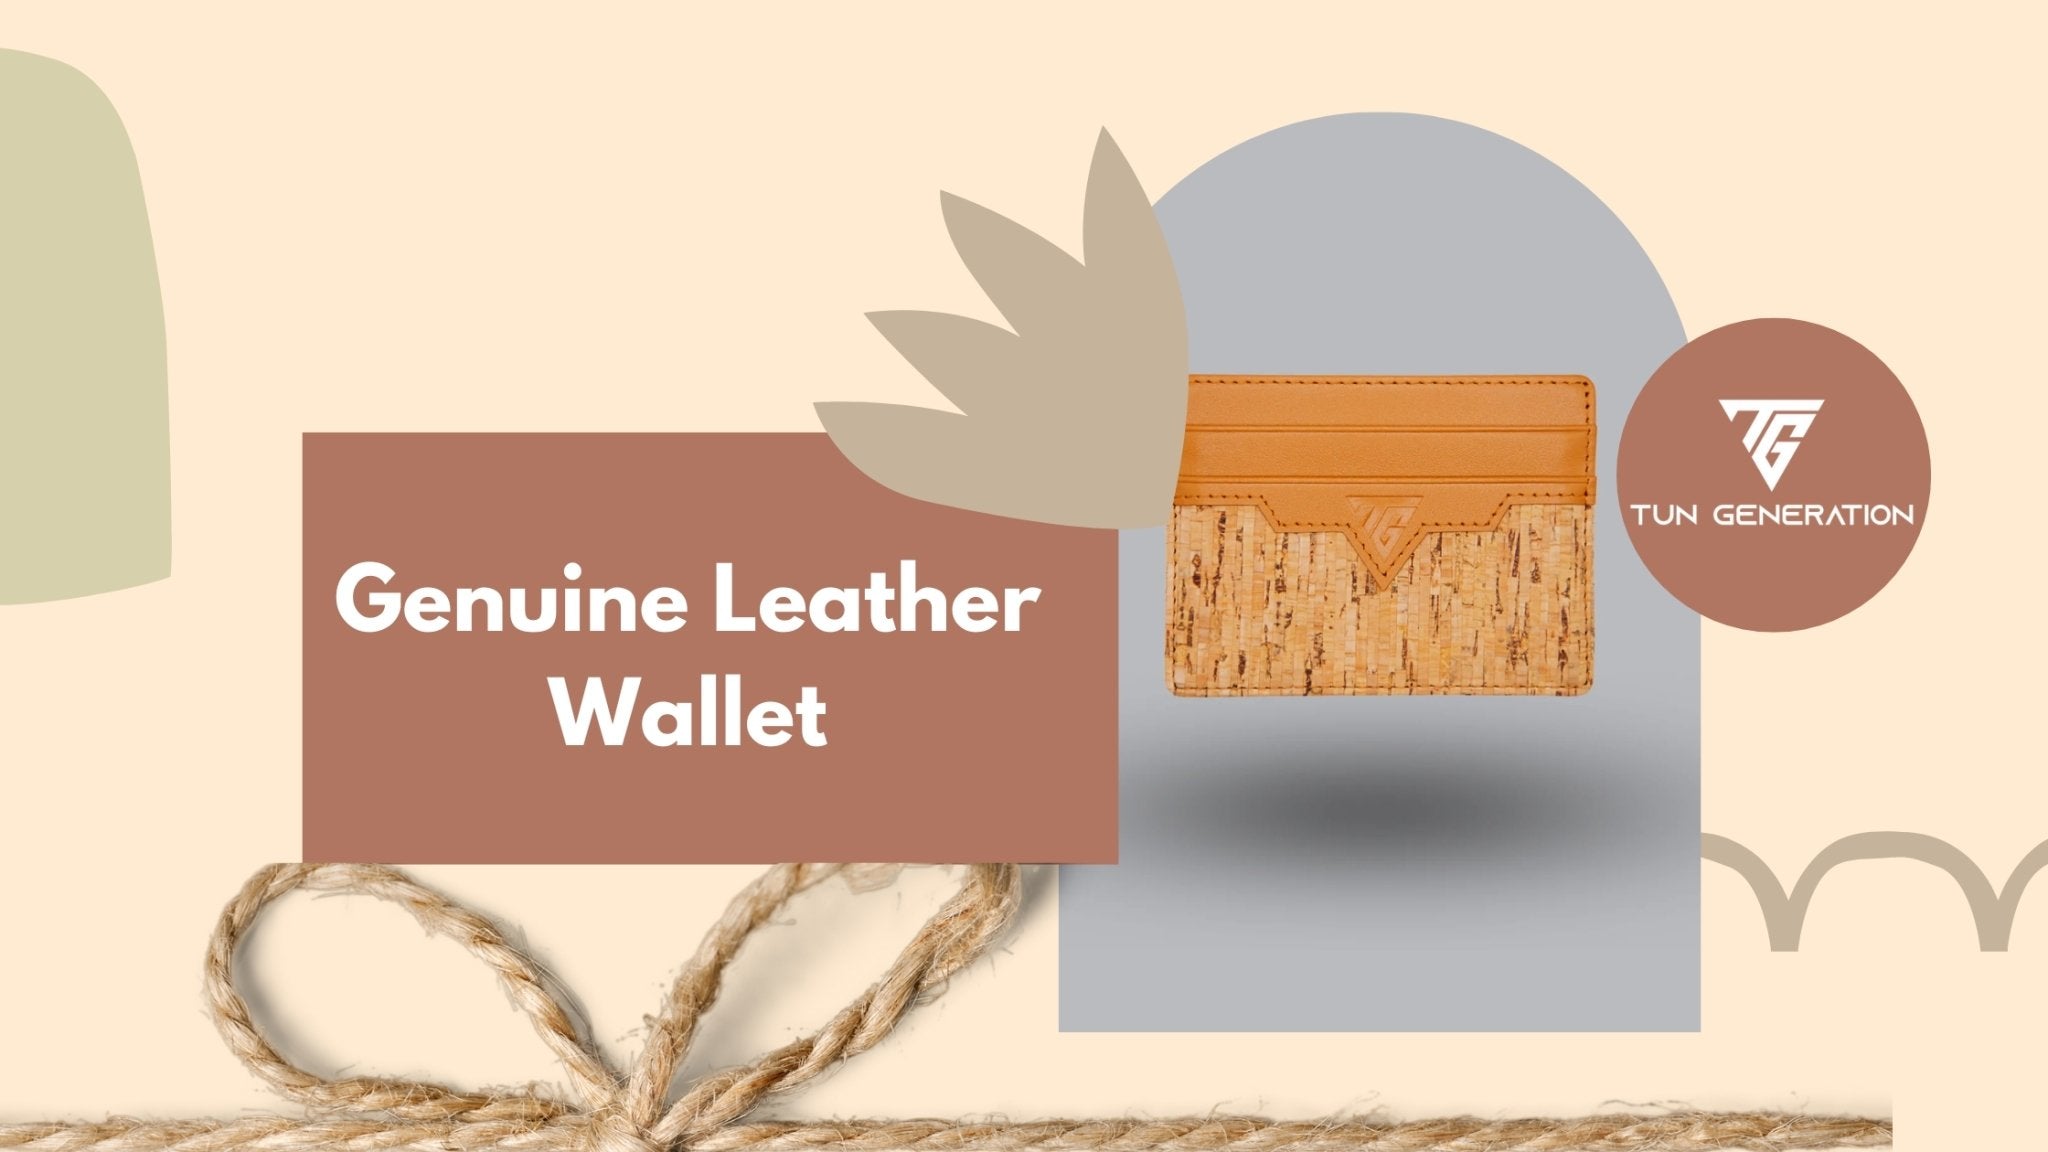 Lux Genuine Leather Wallets, a Wallet for the Modern Day Gentleman - Tun Generation